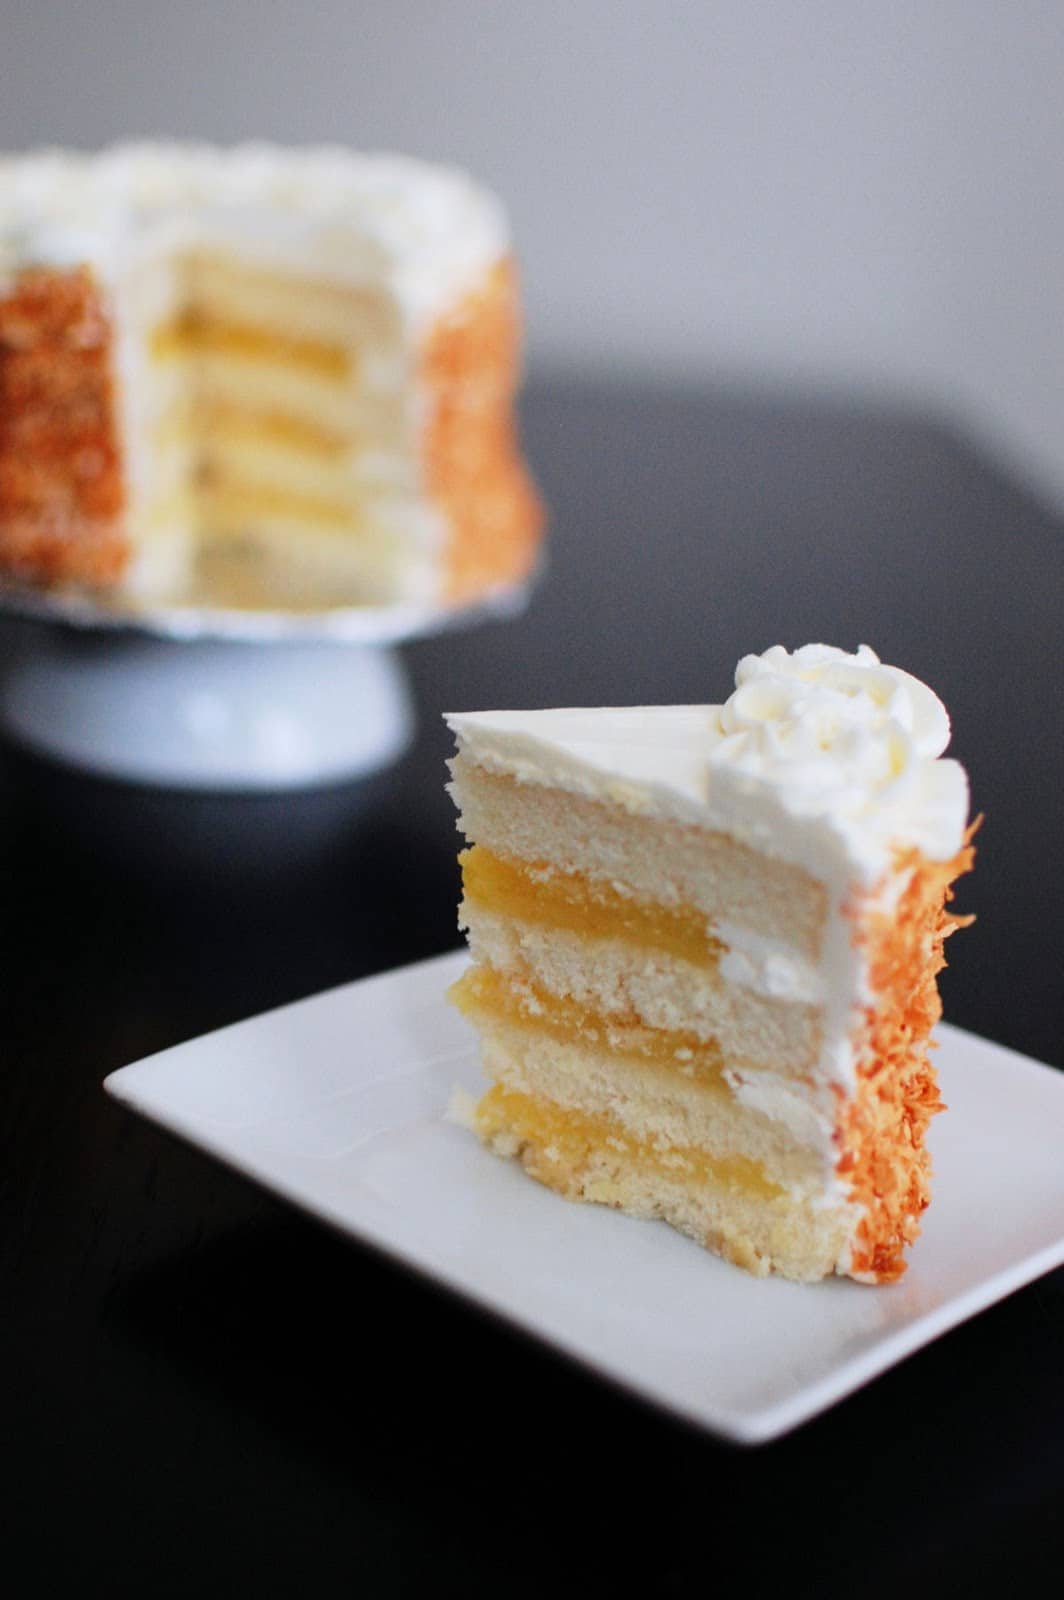 Coconut layer cake filled with lemon curd